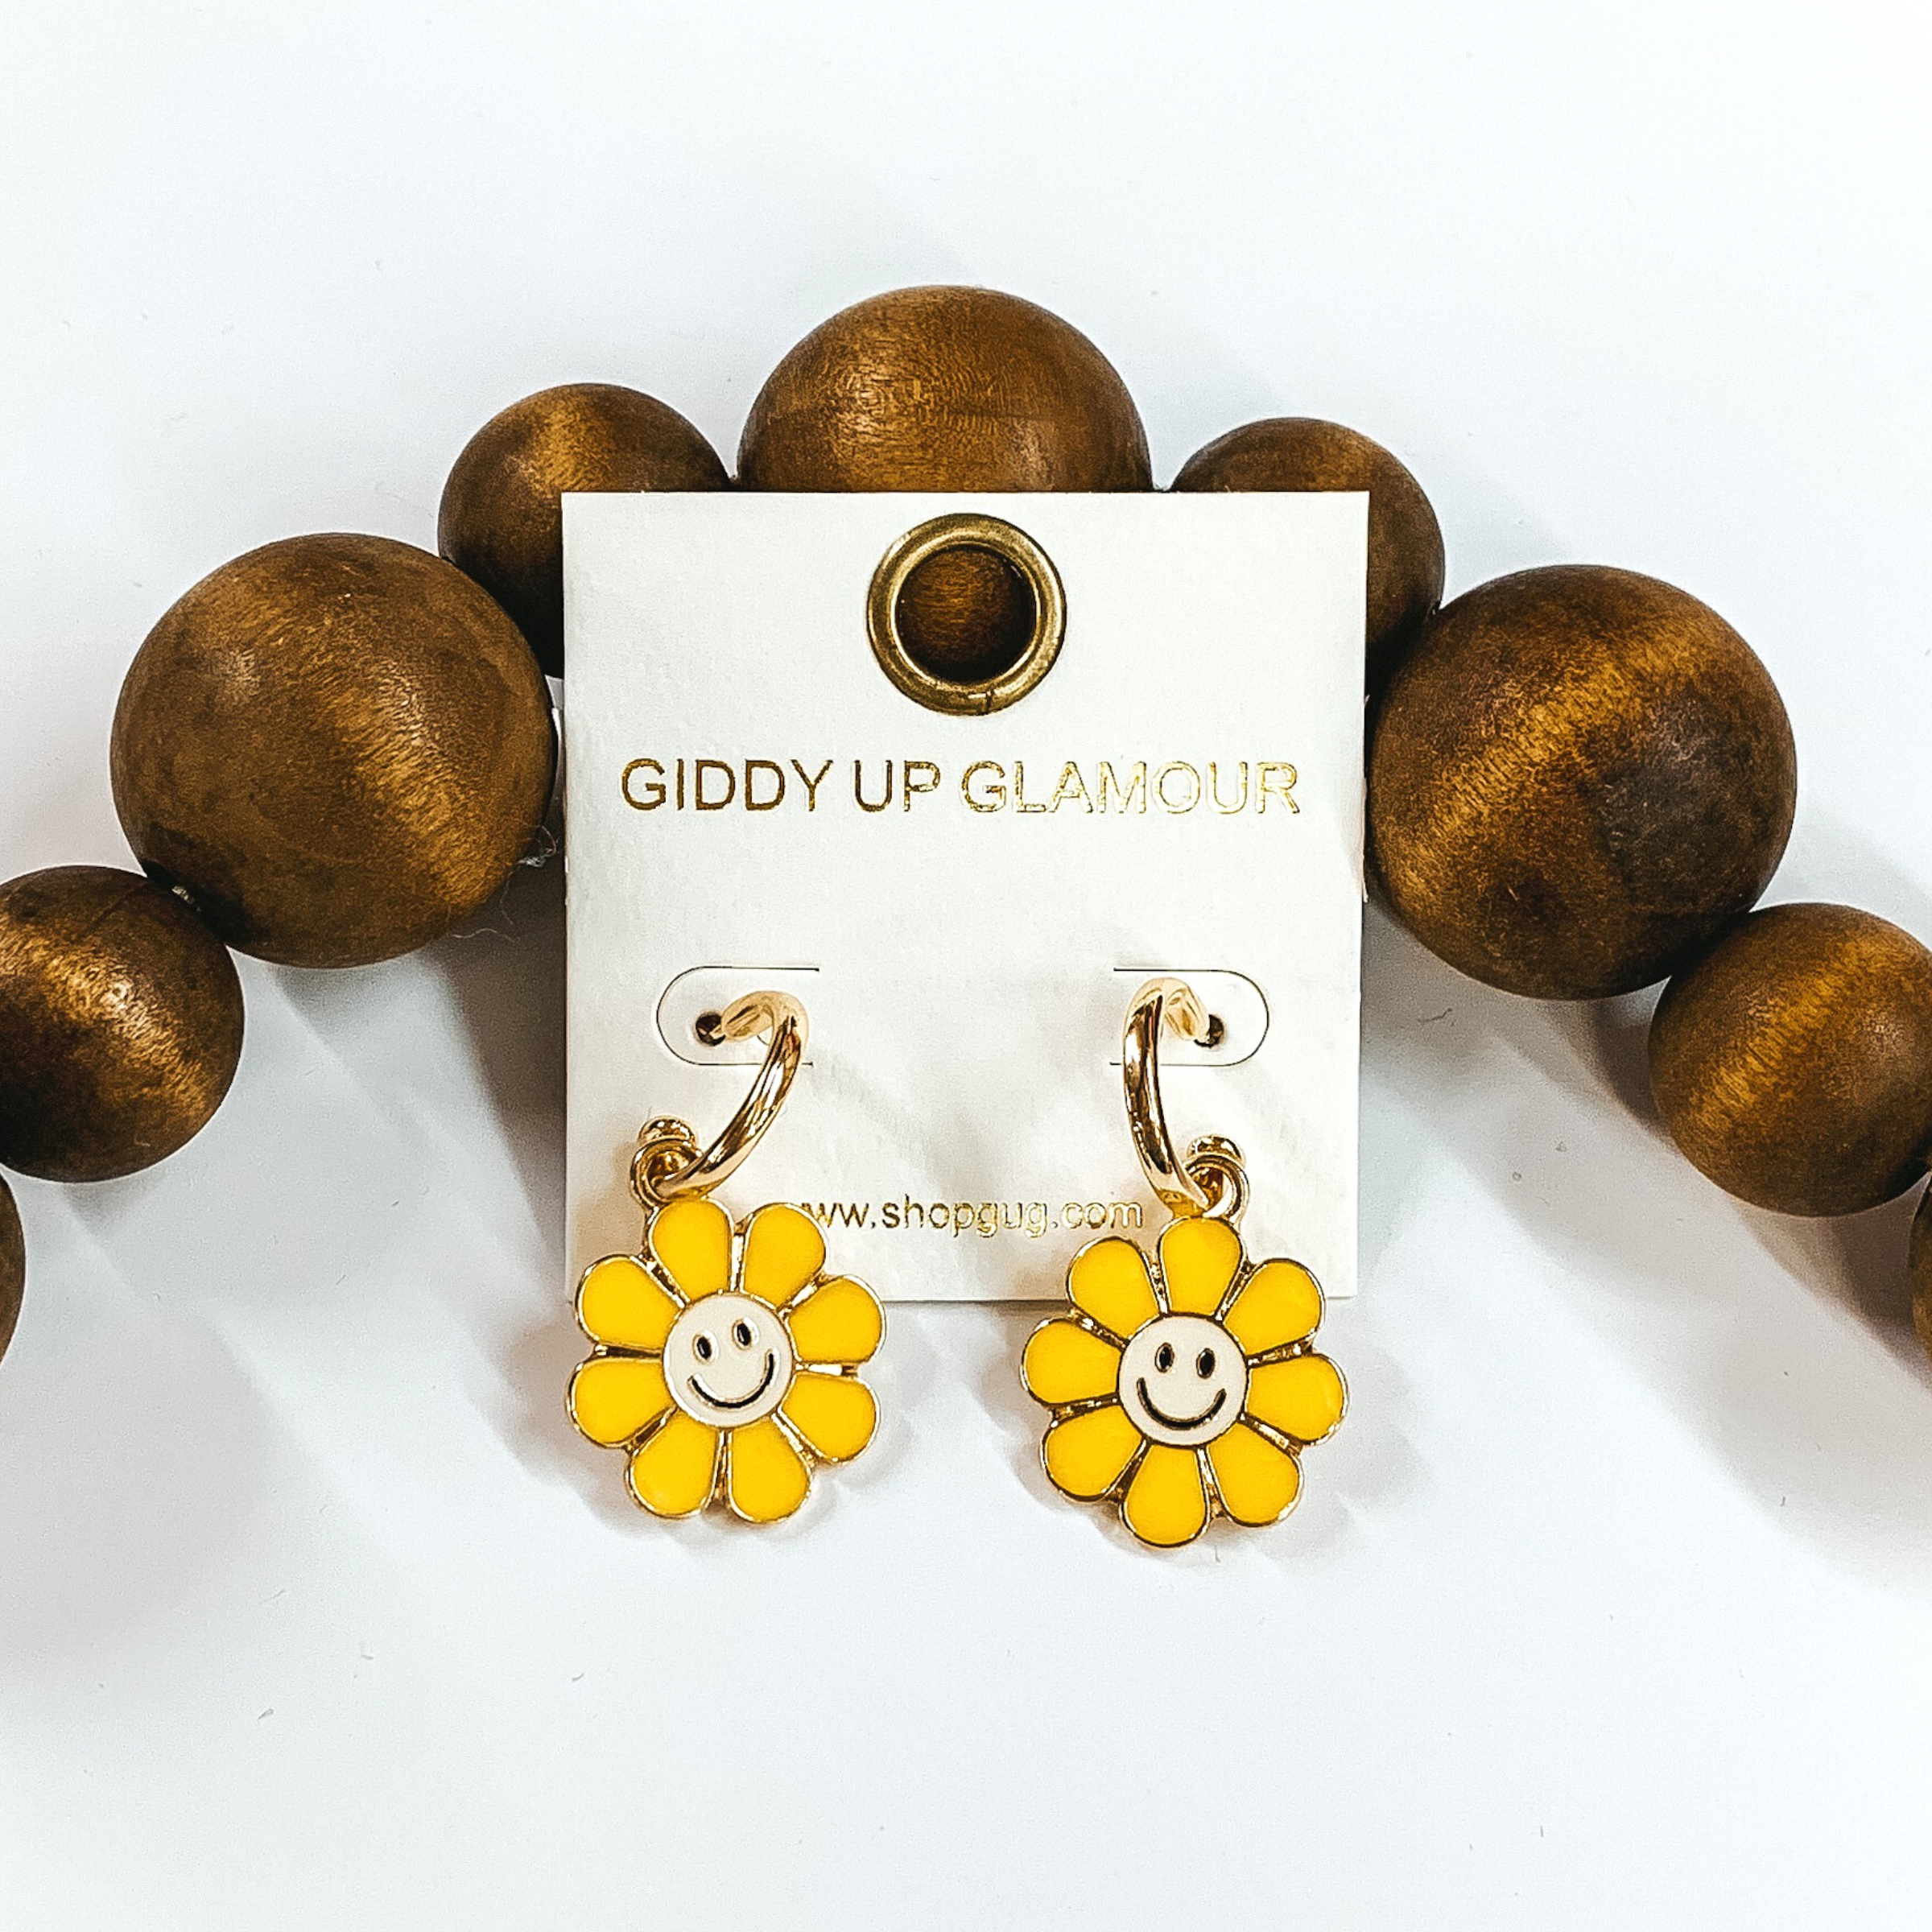 Small, gold hoop earrings with a hanging flower pendant in yellow with an ivory center. The pendant has a black smiley face in the center of the flower. These earrings are pictured laying on a white background against dark brown beads towards the top of the picture. 